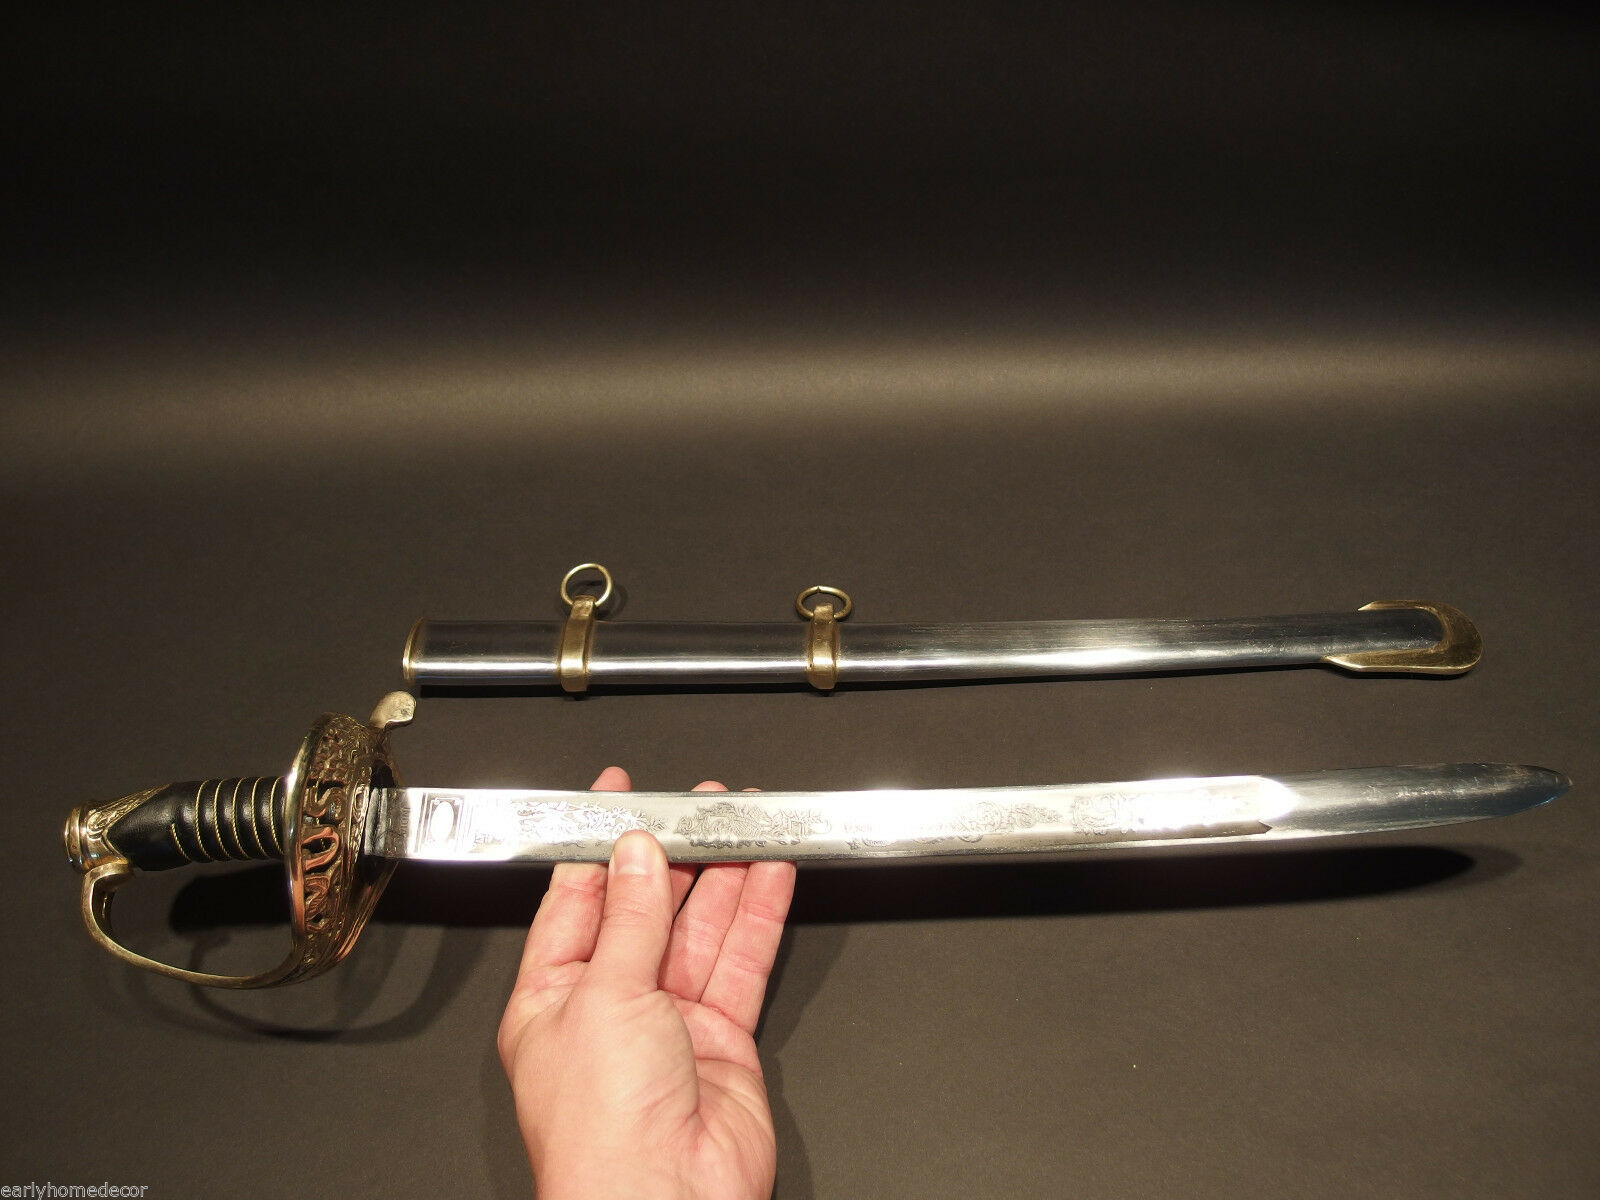 28" SMALL Antique Style 1860 Union Staff Officer Carbon Steel Sword US - Early Home Decor